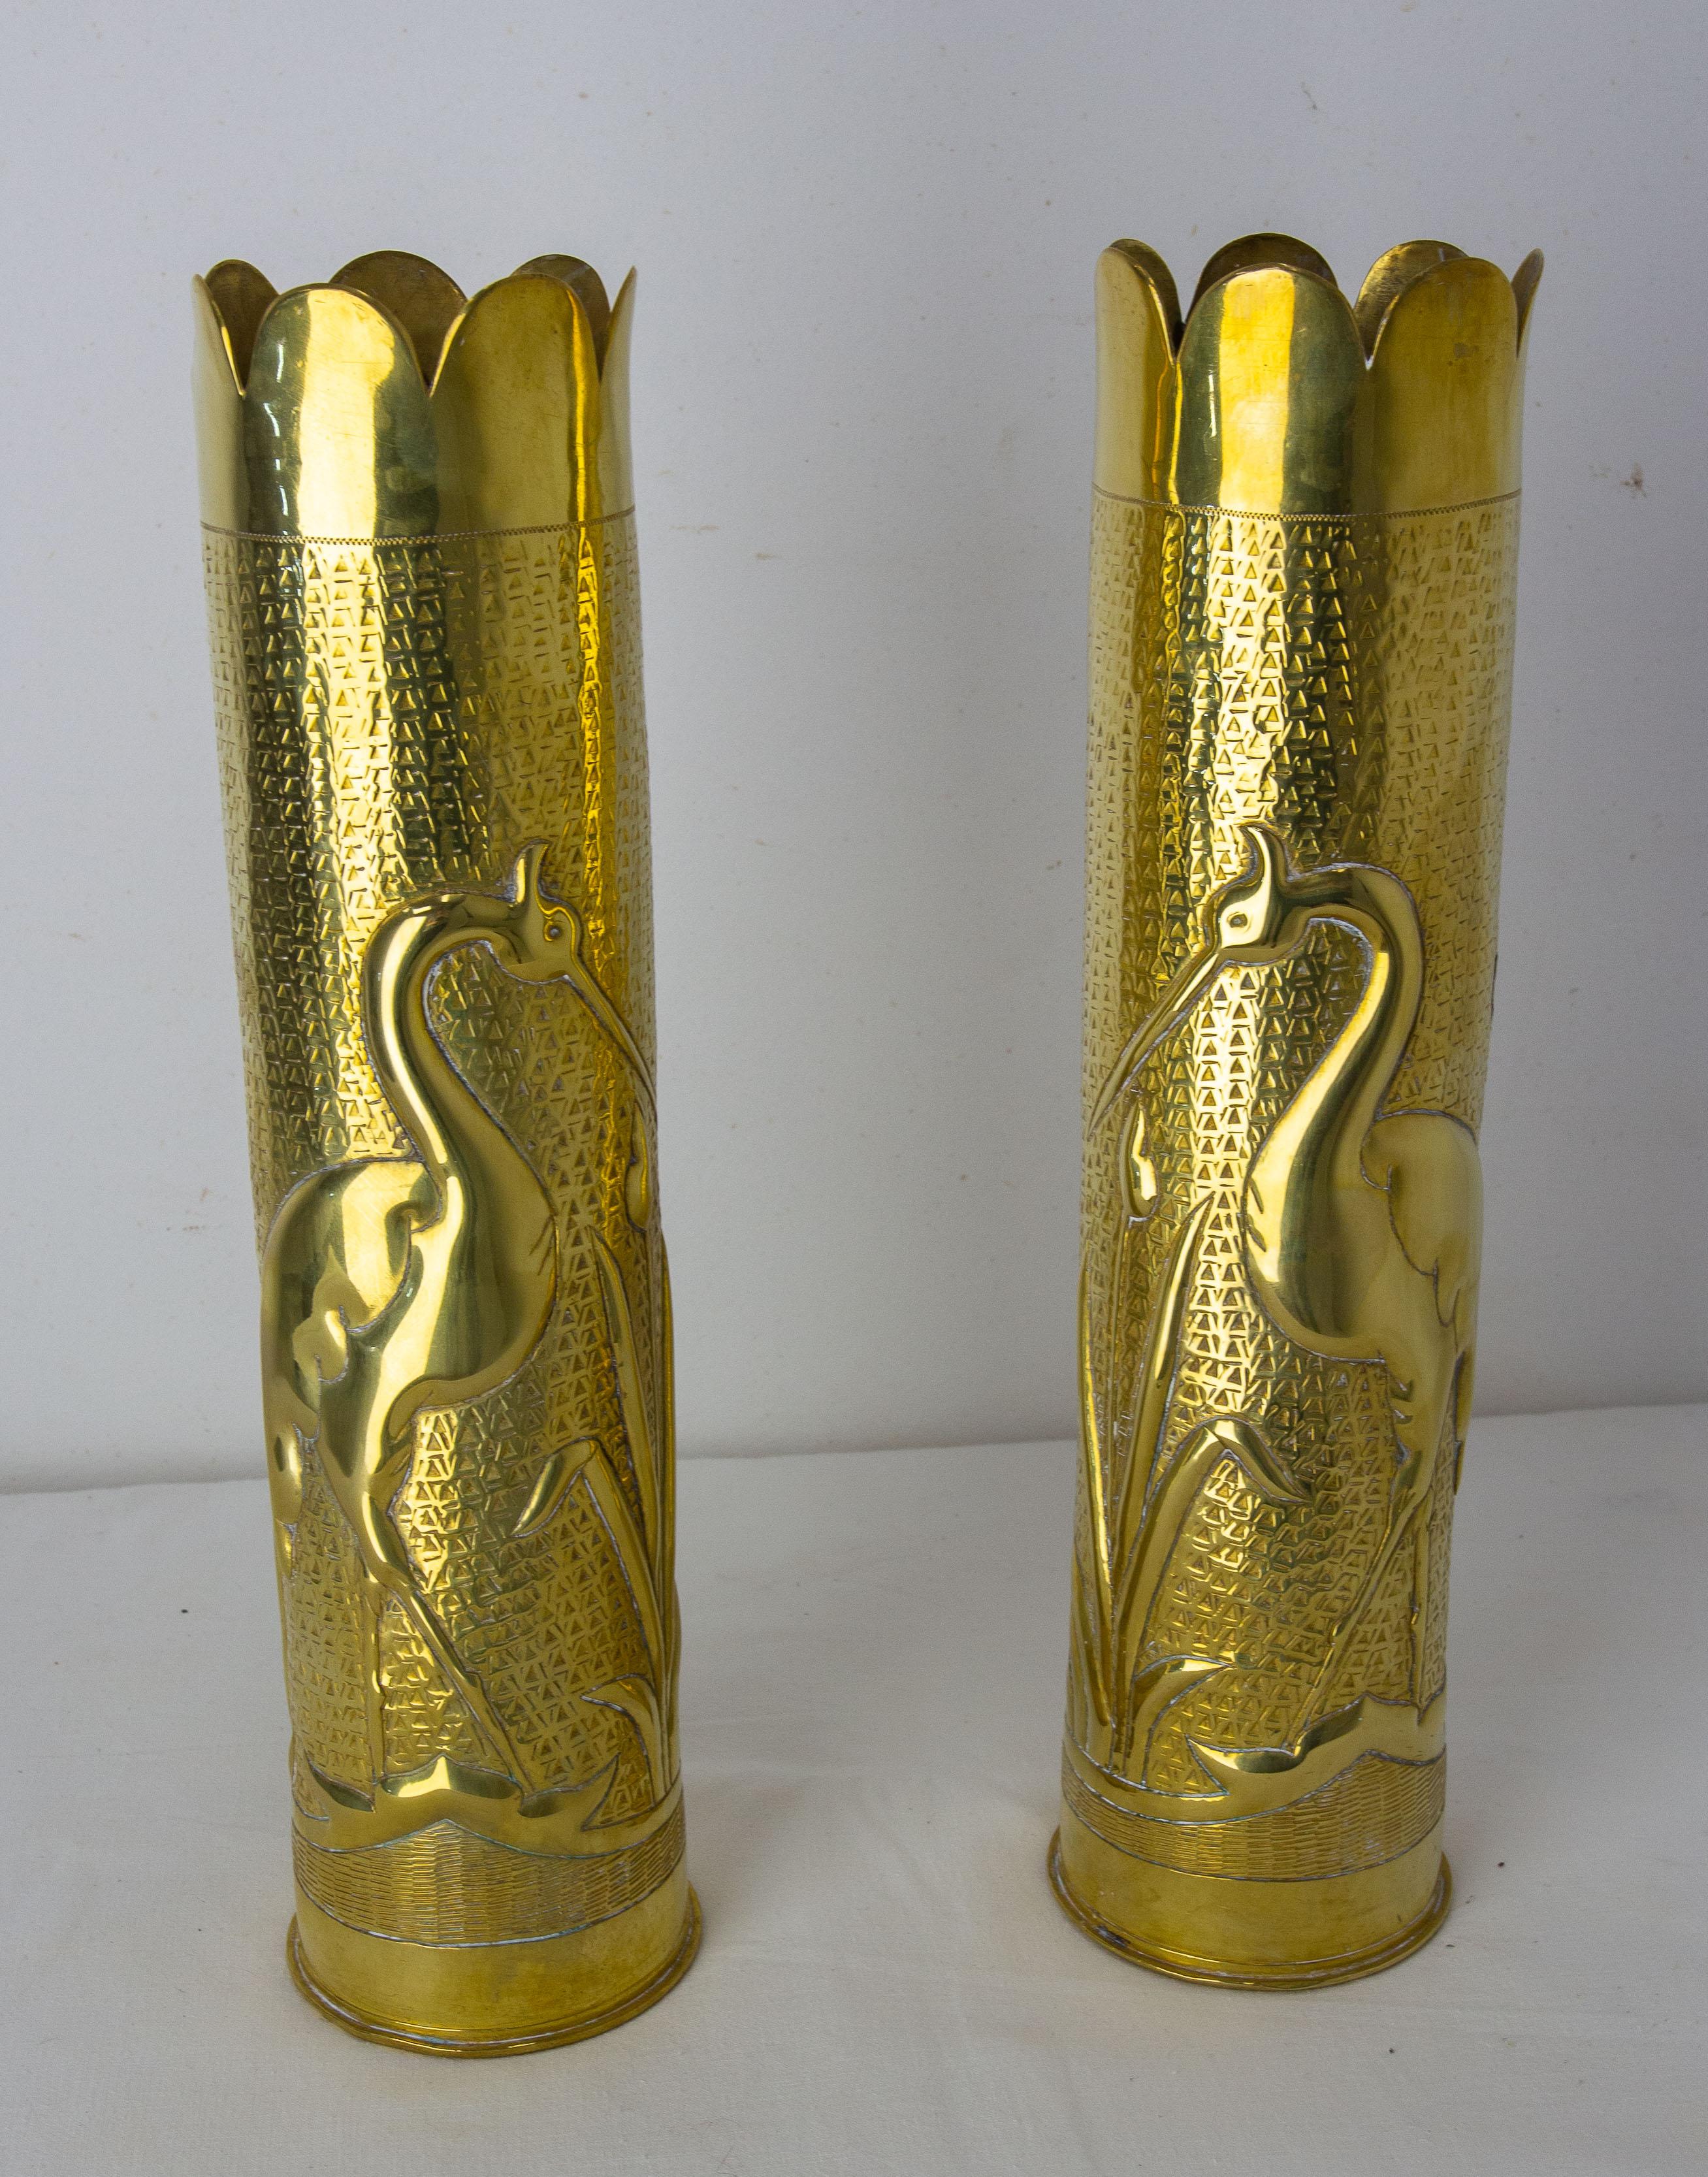 Antique French pair of shell casings from the World War I.
Trench Artillery
Brass engraved representing a heron in a pond surrounded by rushes on each casing.
A crack in one of the sockets nothing disturbing (please see photo)
Good